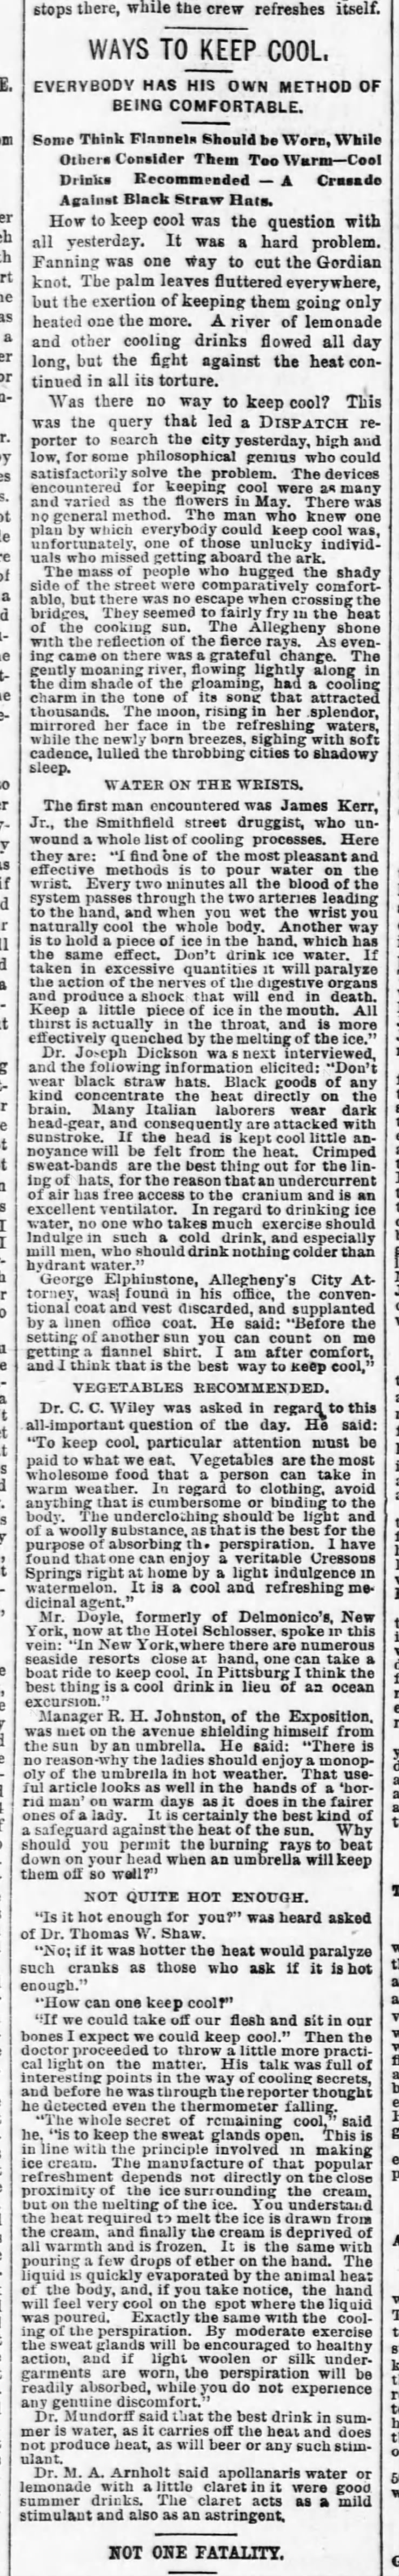 Tips for keeping cool from Pittsburgh residents (1890)